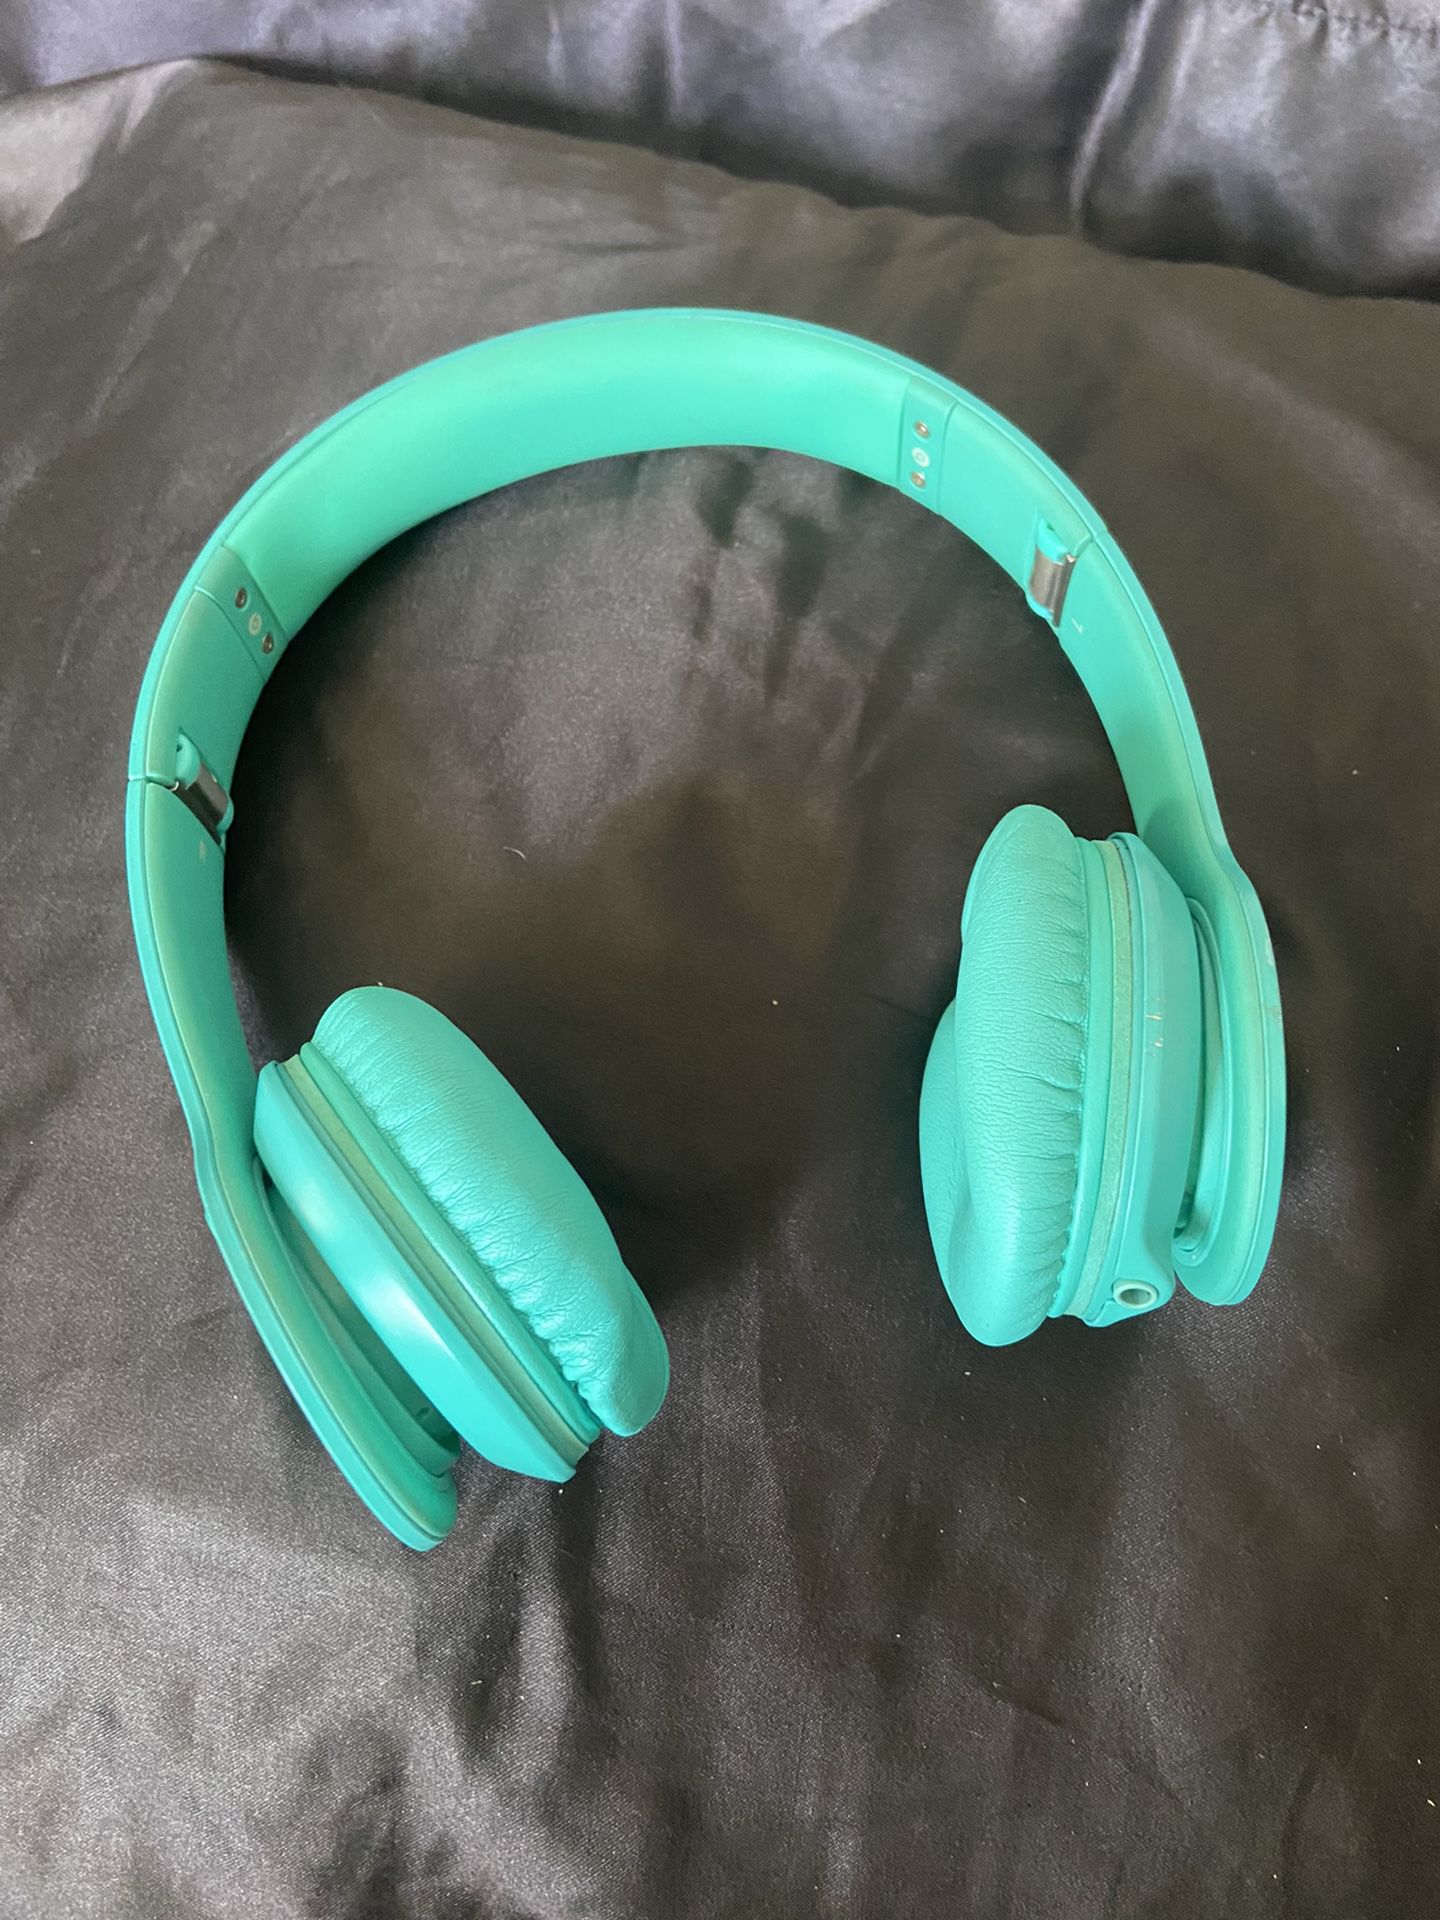 Teal Beats by Dr. Dre Beats Solo